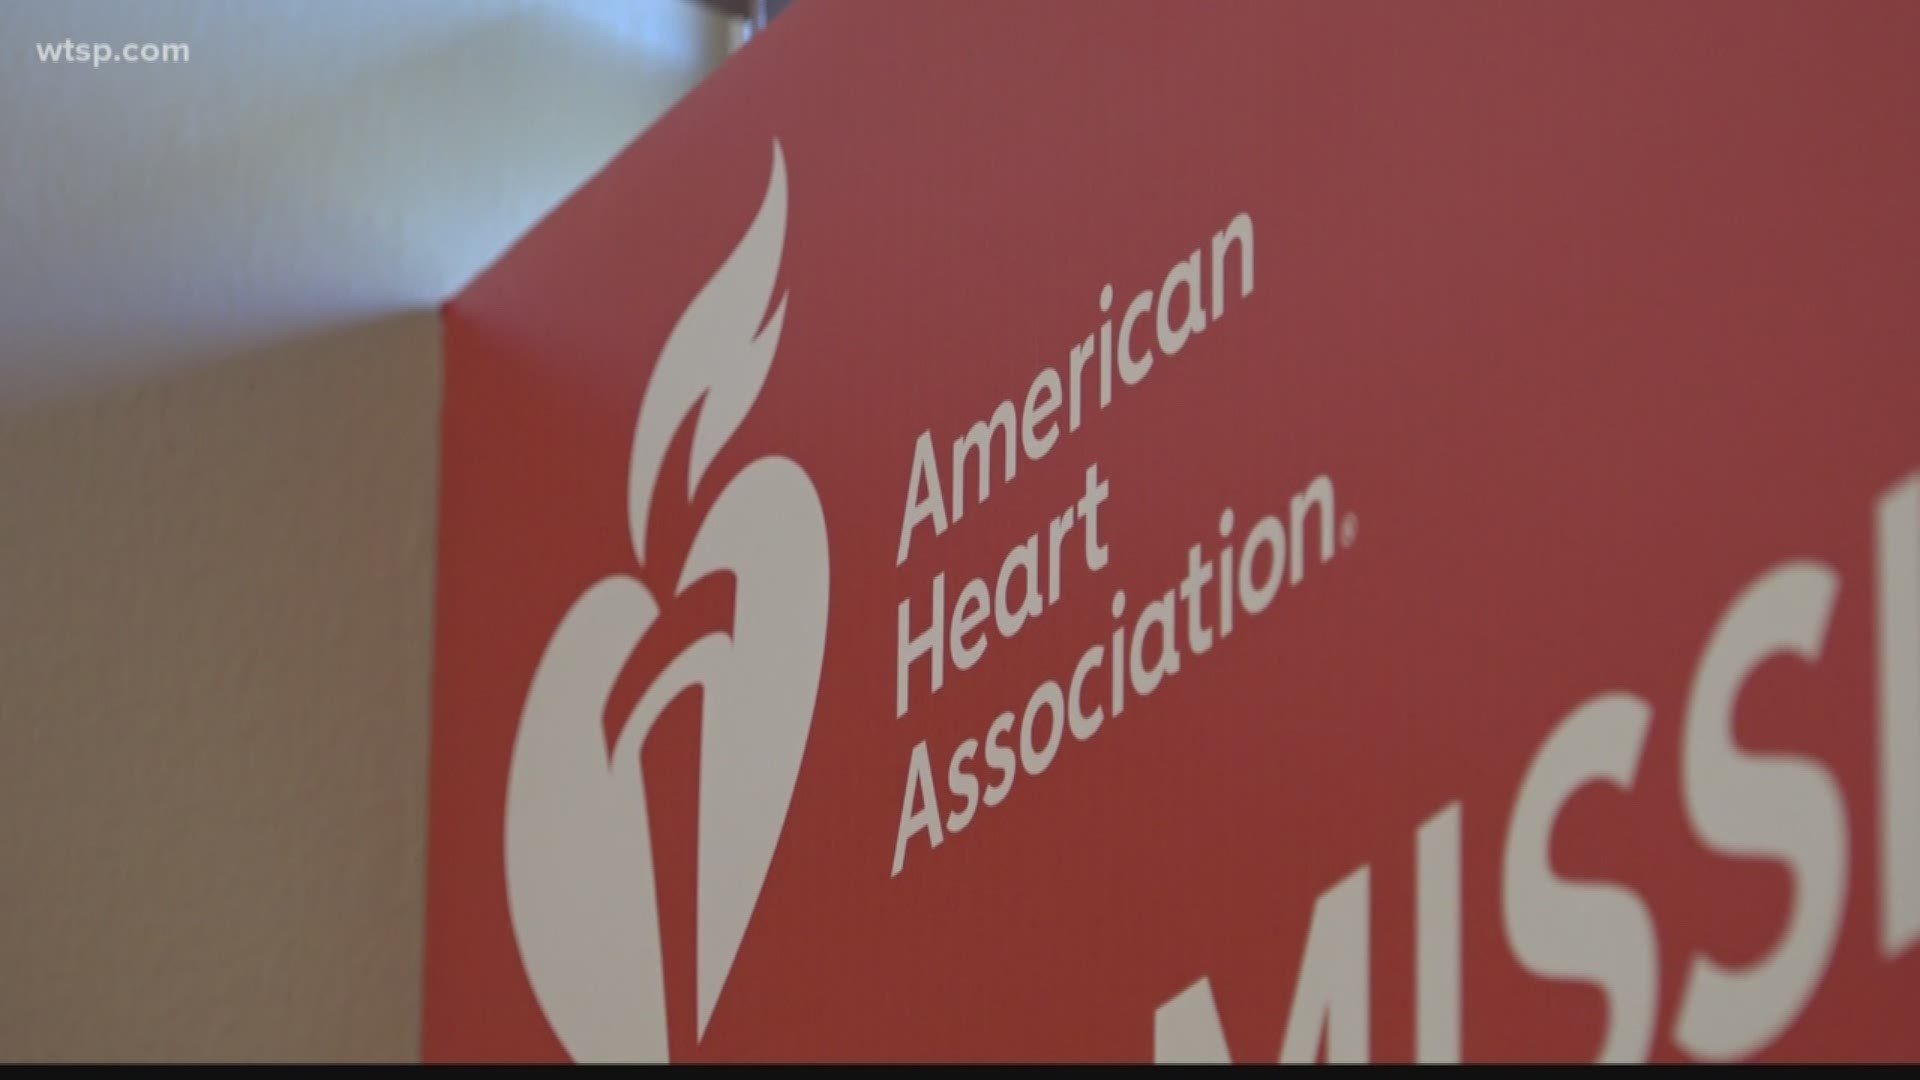 The annual tradition to bring awareness to heart health began in 1963.